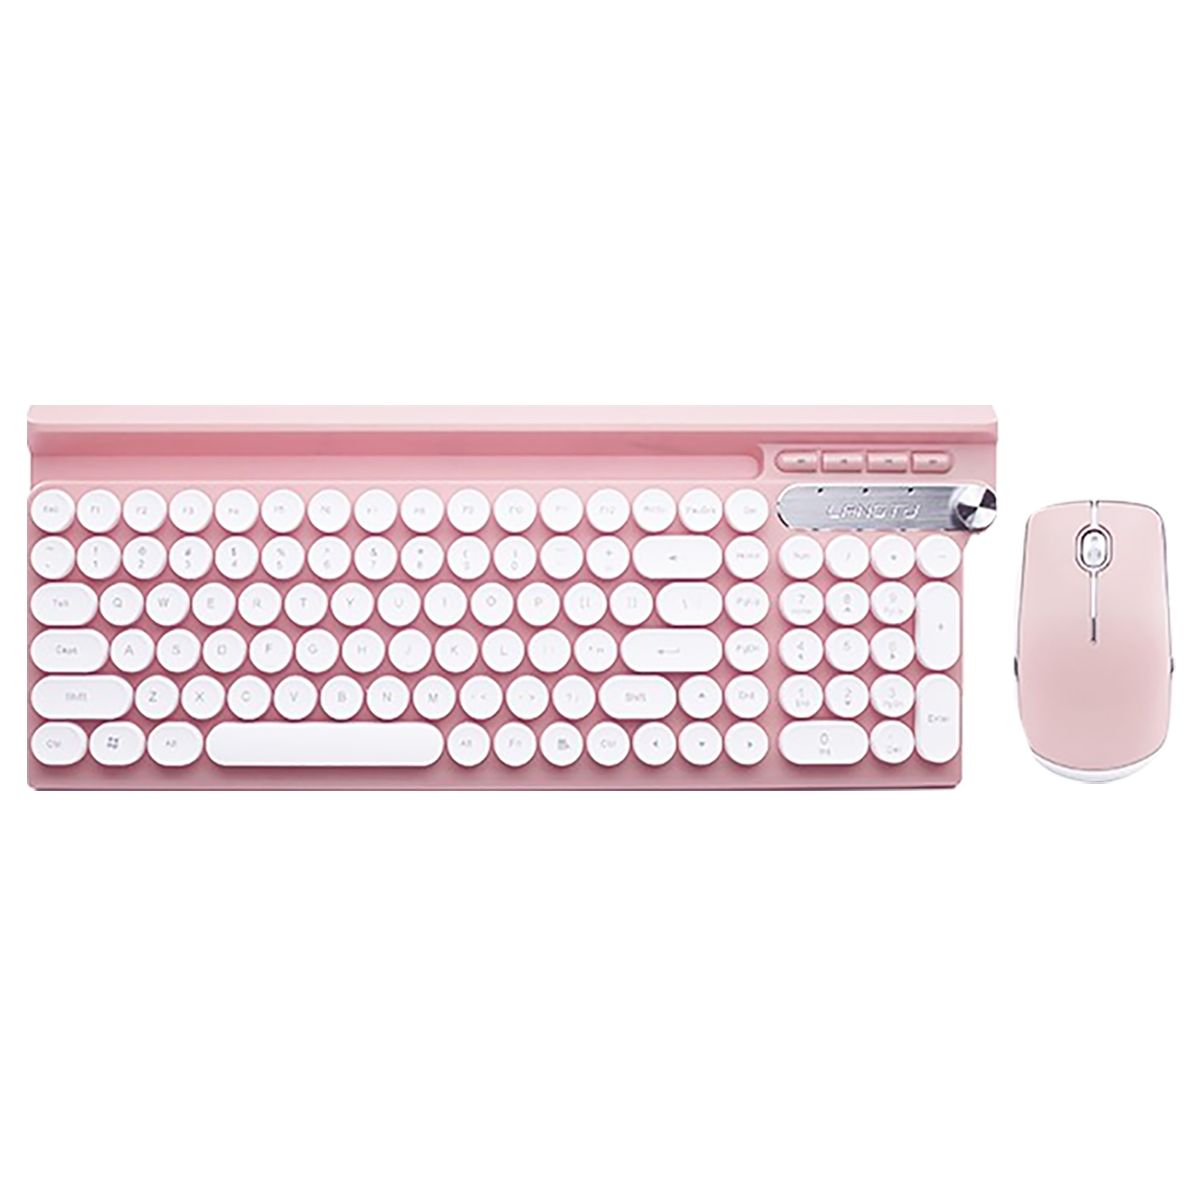 LANGTU LT500 Rechargeable Keyboard and Mouse Set